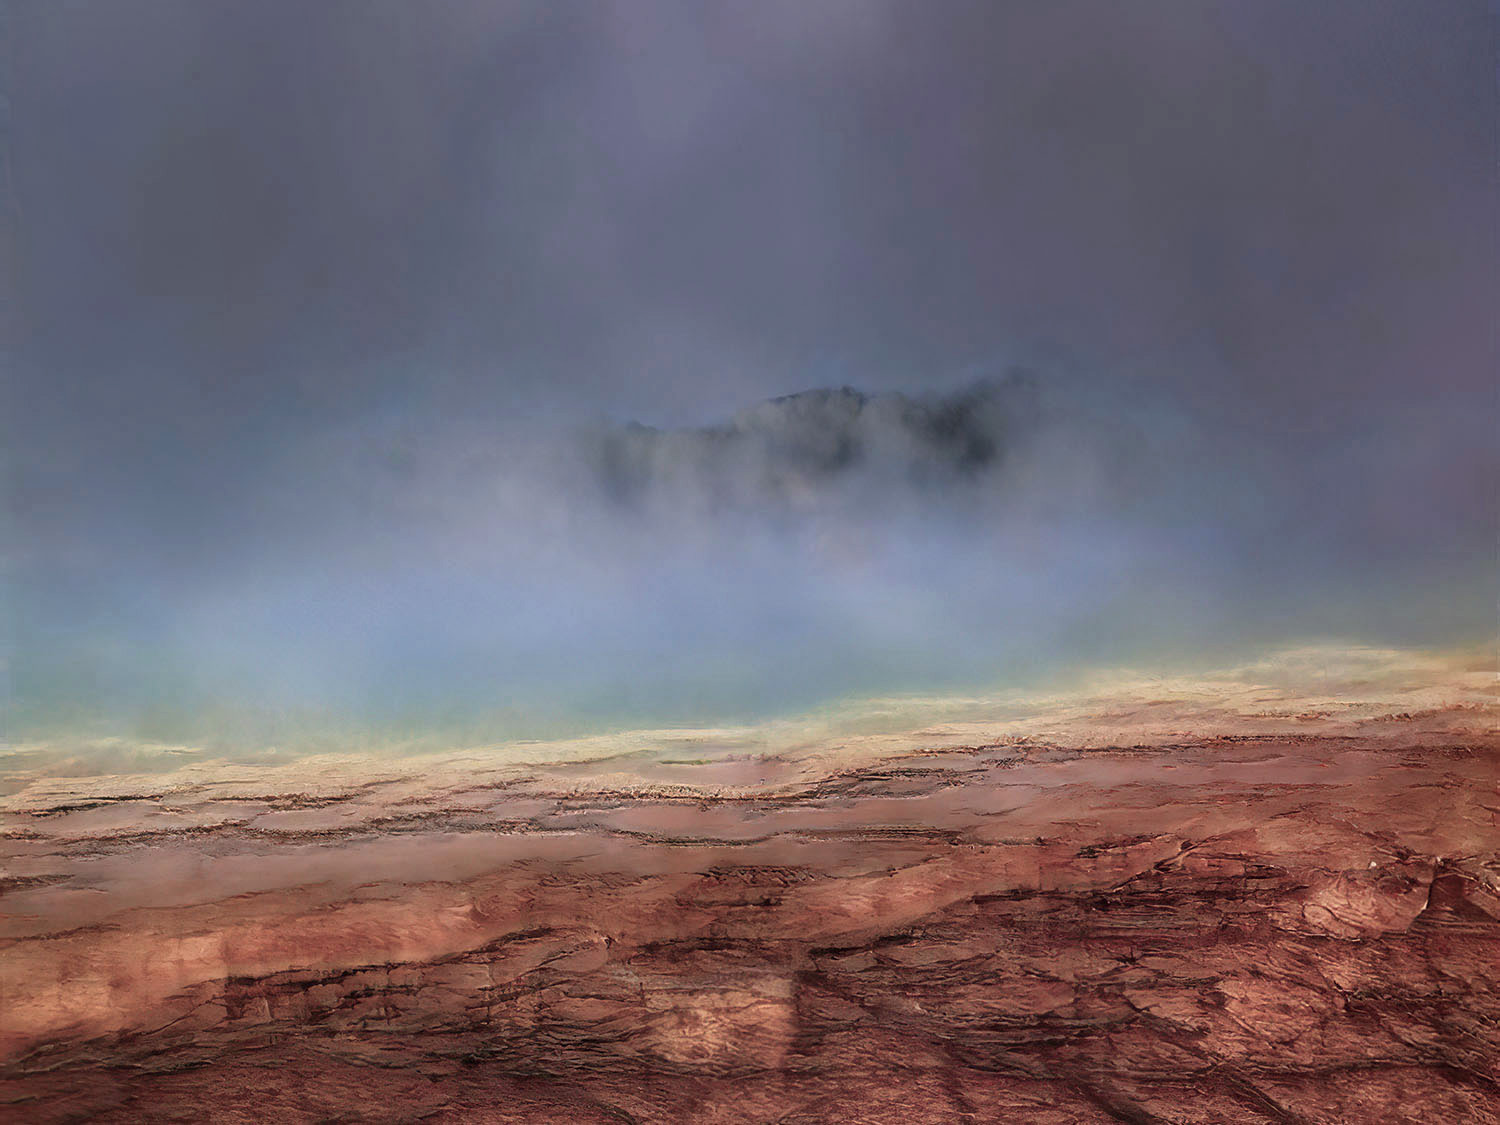 A computer generated image  image of rocky landscape with fog masking the horizon.